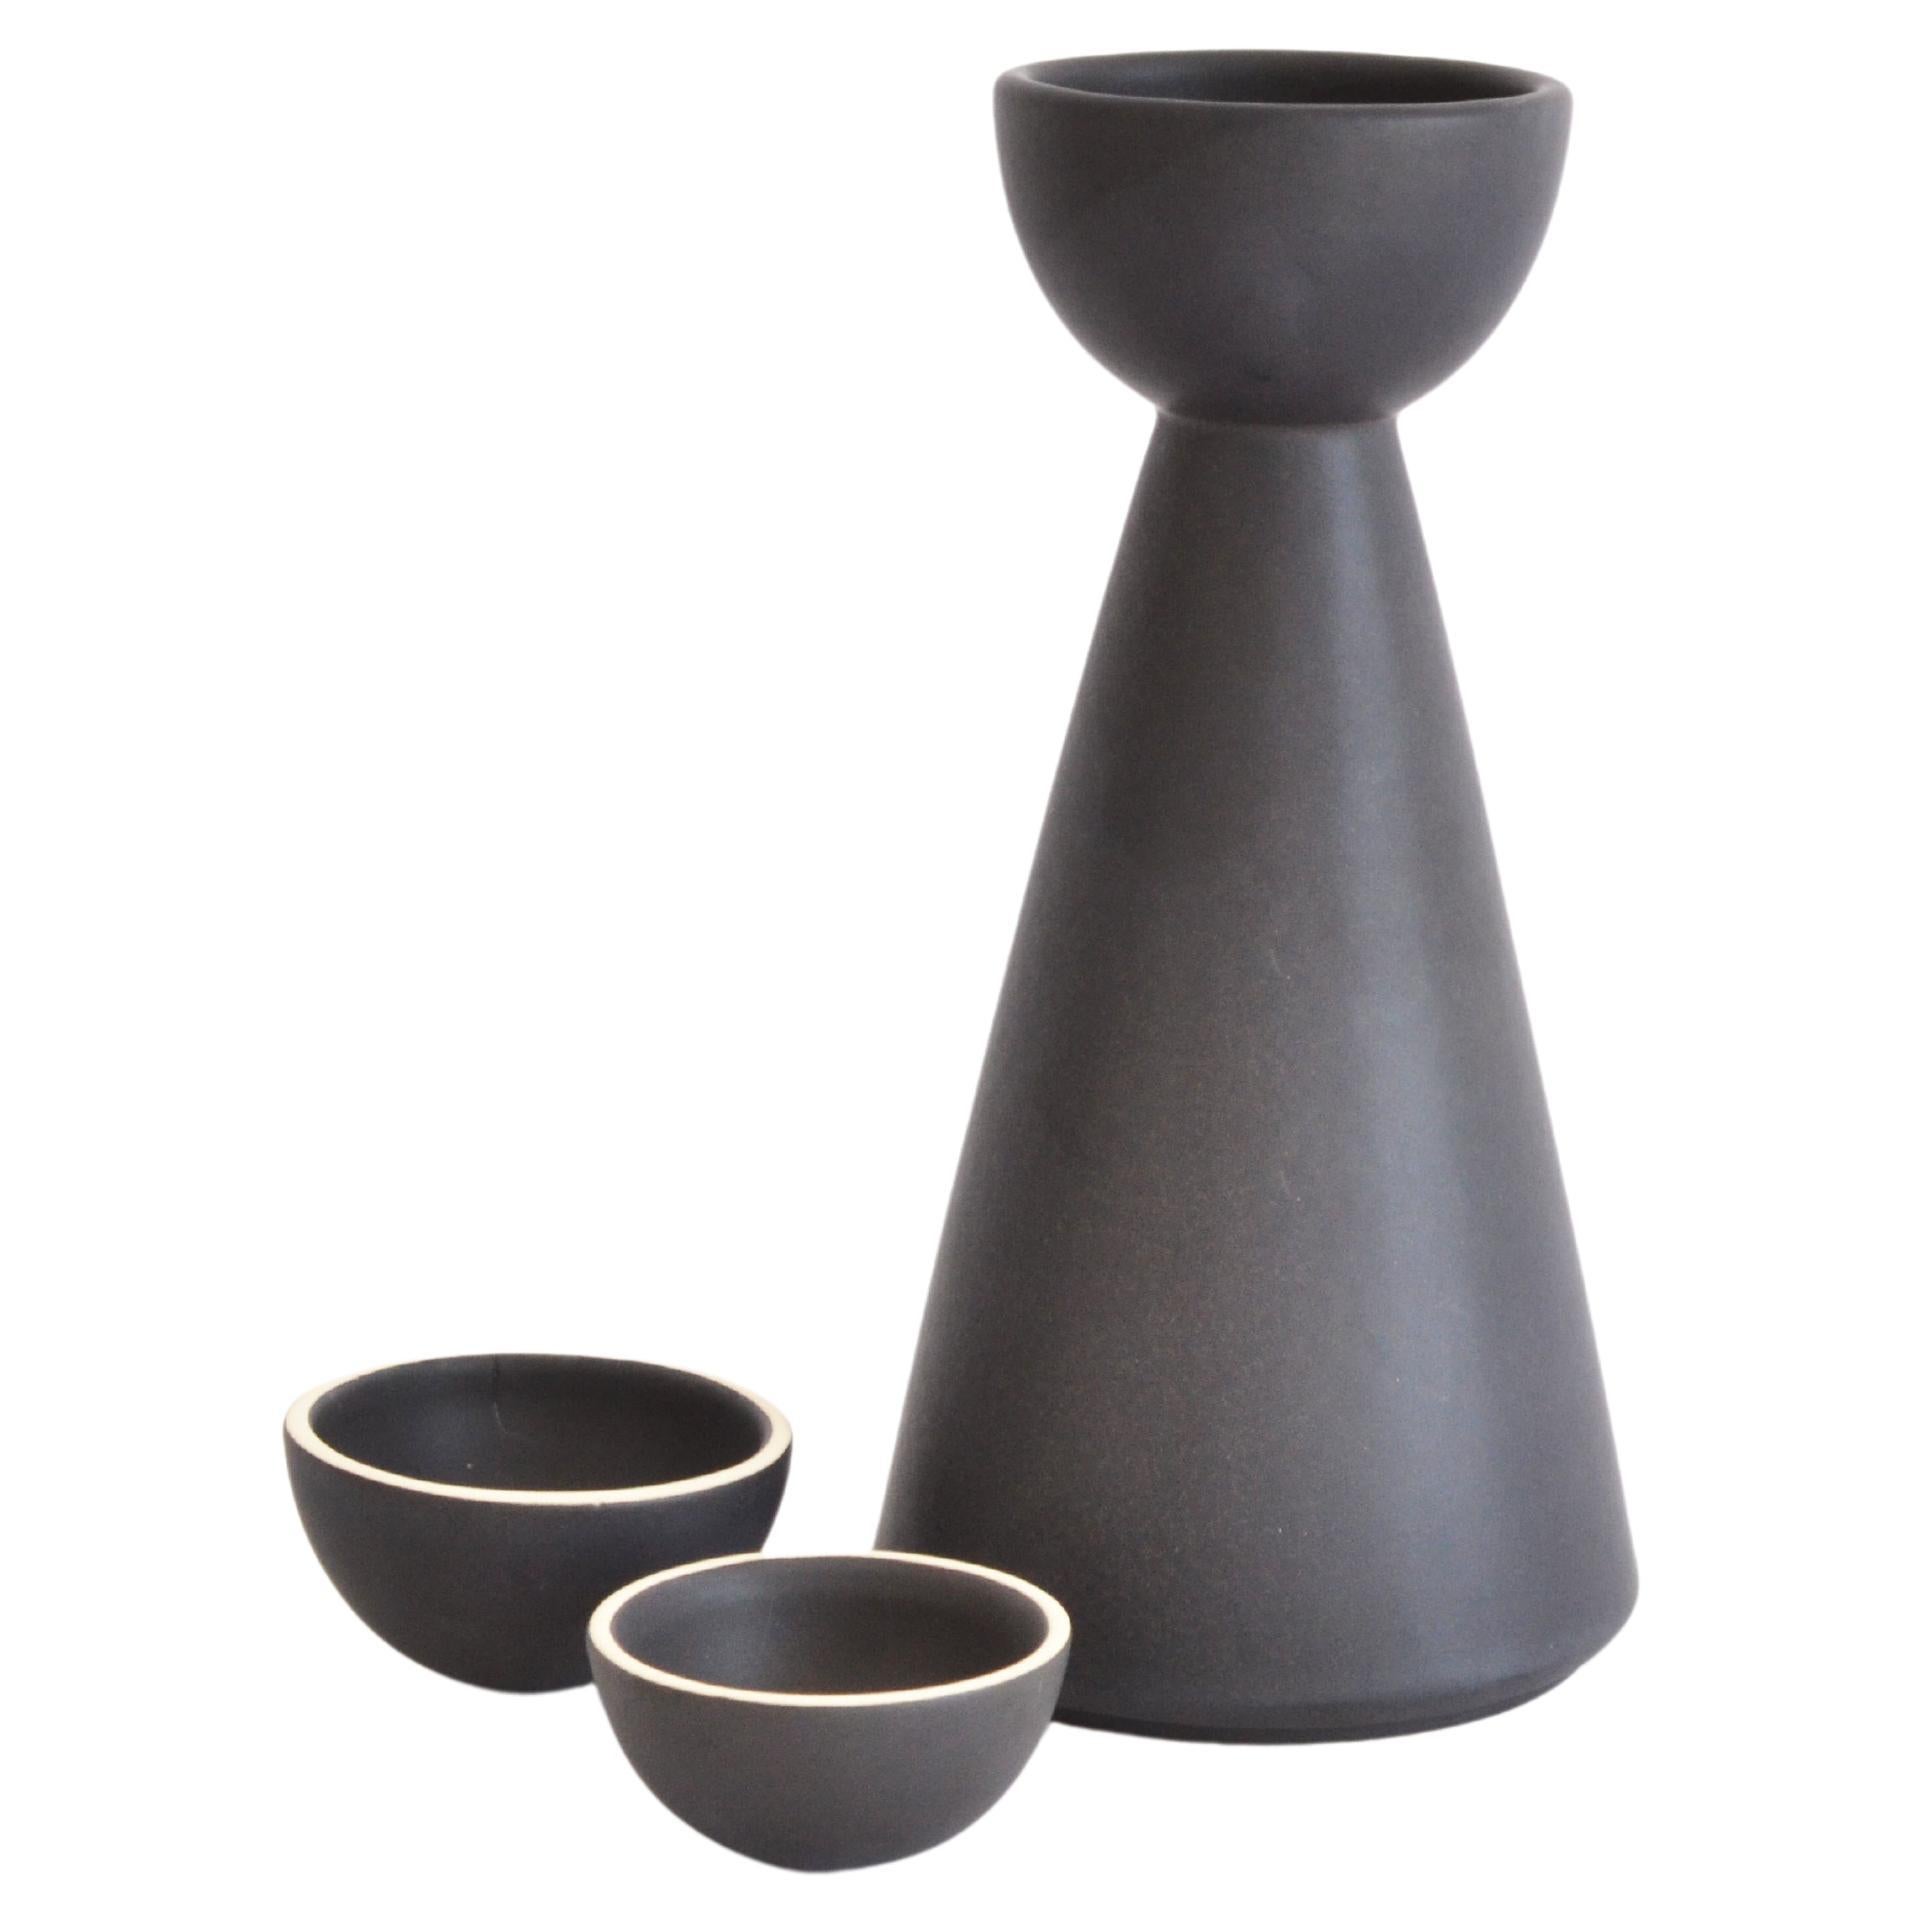 BLACK Carafe Contemporary Inspired by Traditional Jug Pitcher for Mezcal en vente